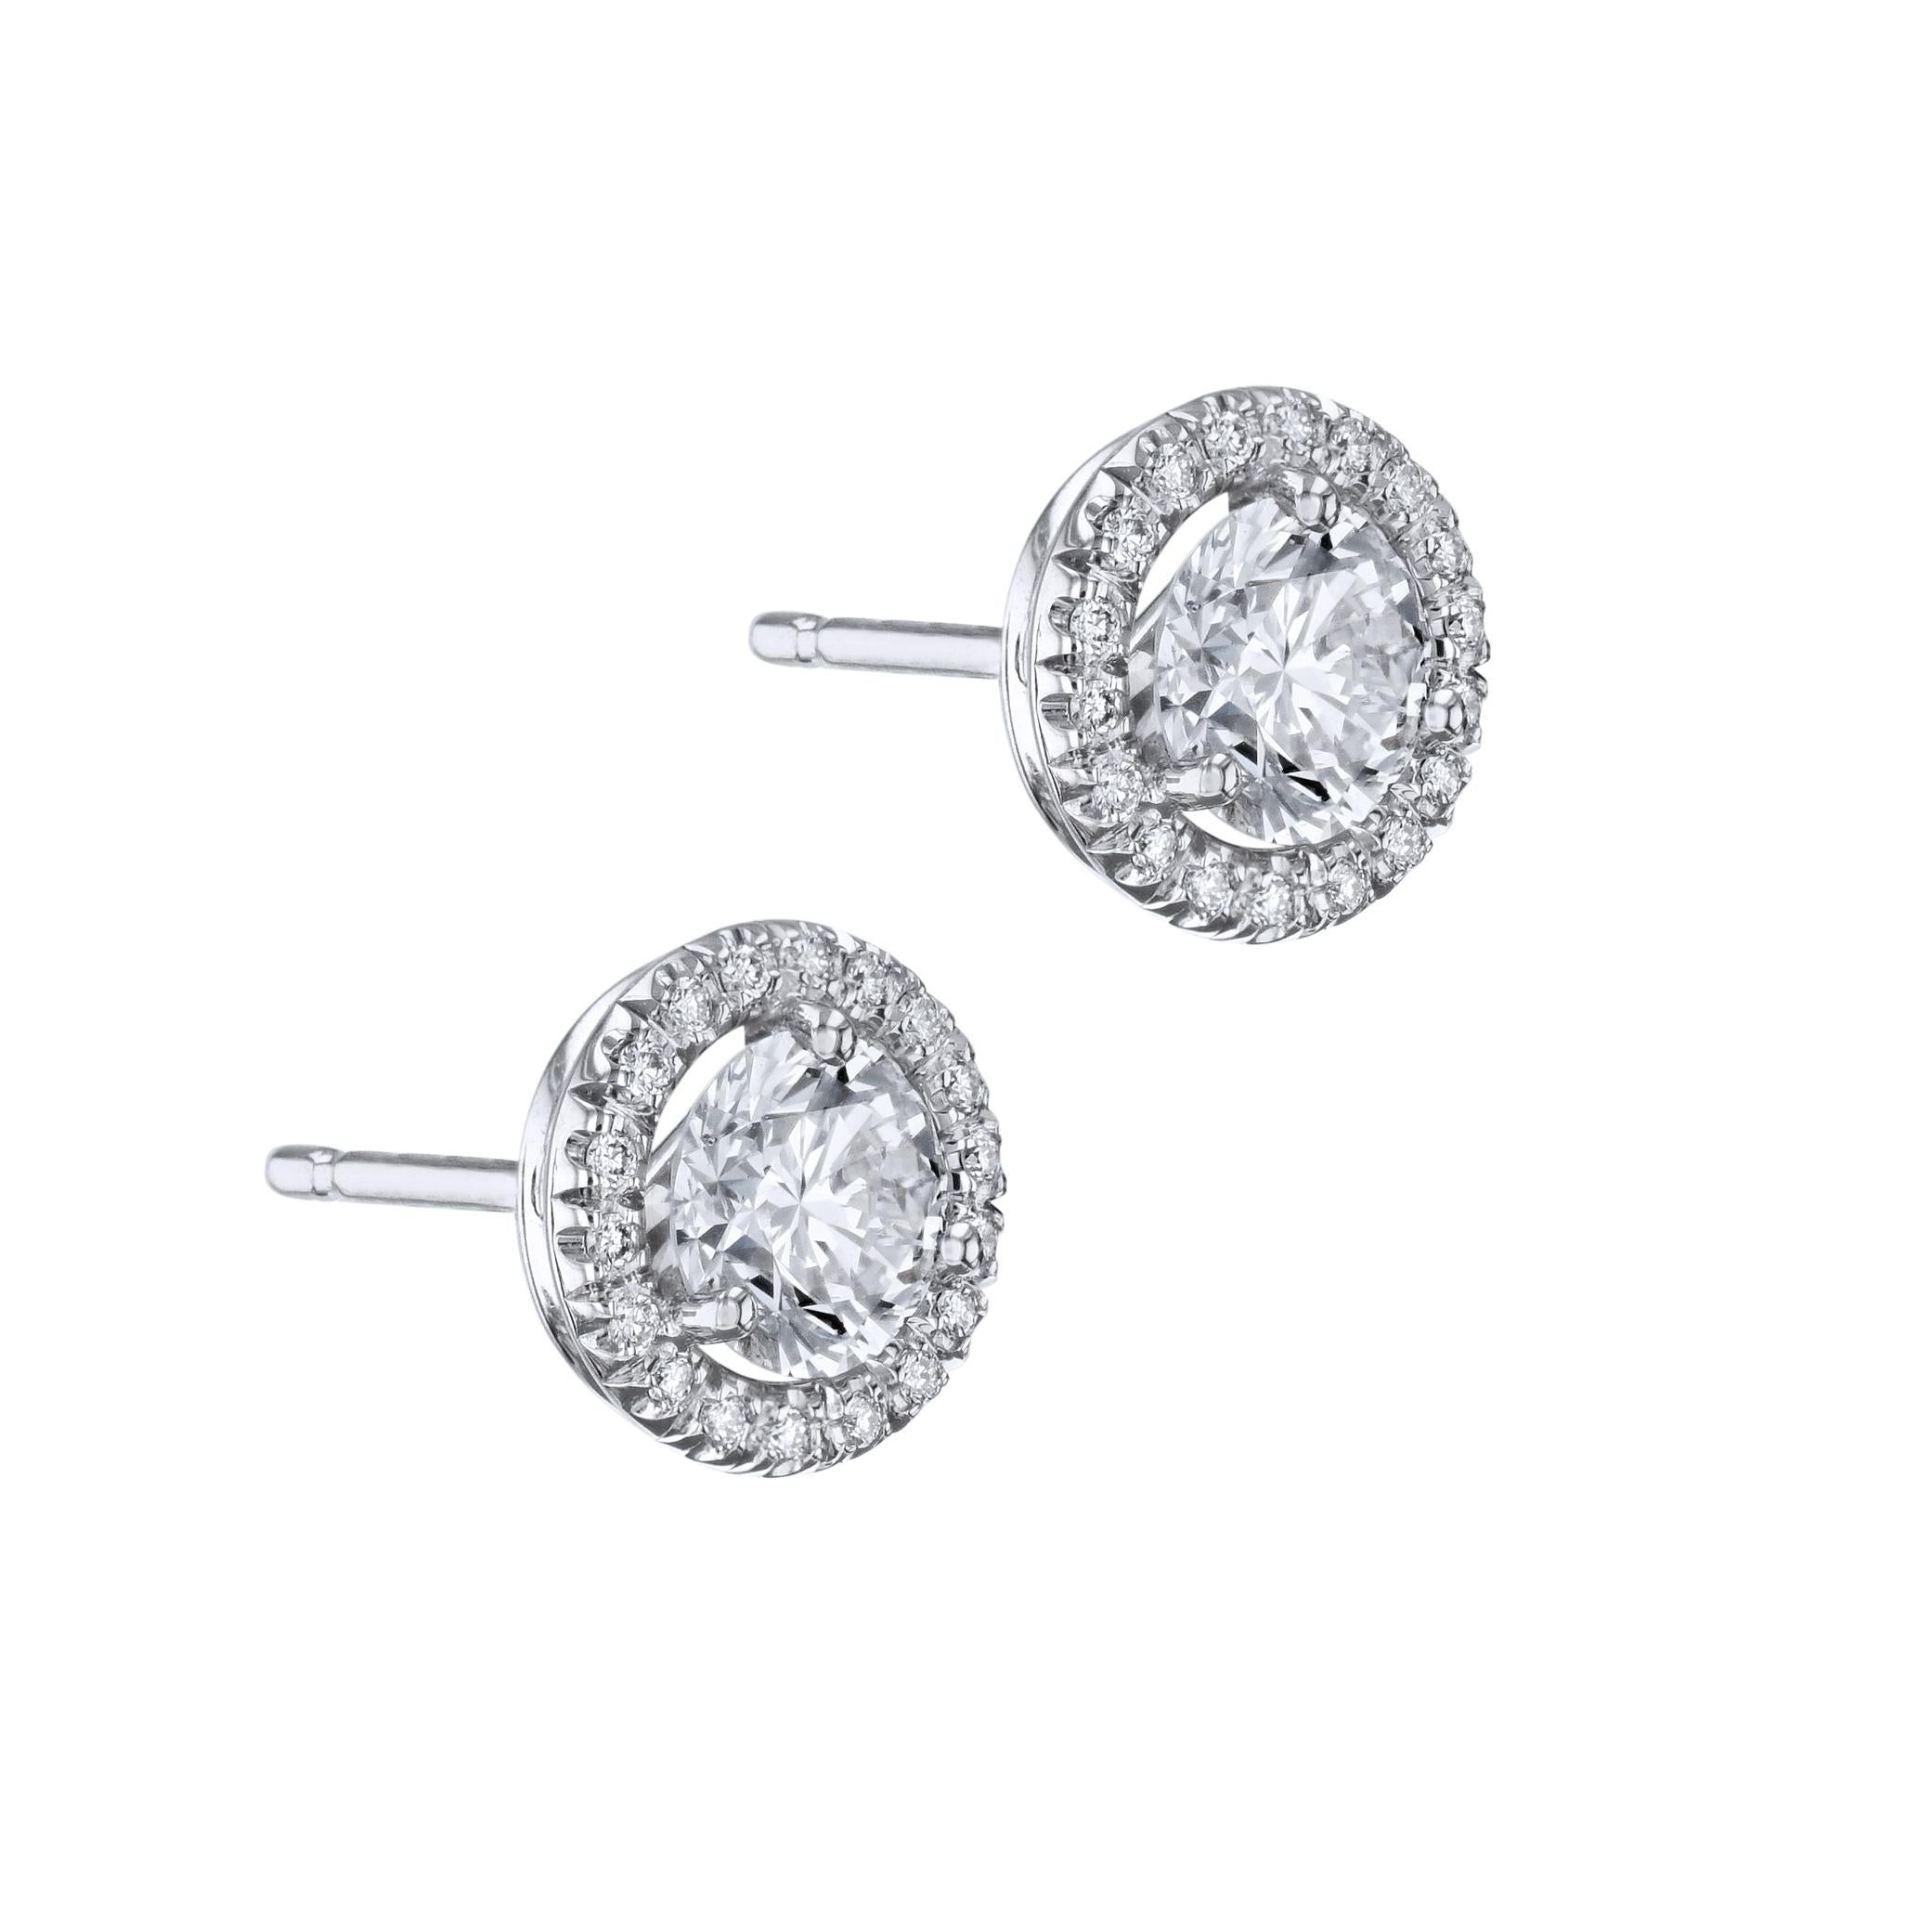 Glimmer with elegance in our Diamond and Pave Stud Earrings. Crafted in 18 karat white gold, they feature center diamonds pave set for added sparkle. Brighten any look with these magnificent handmade fancy stud diamond earrings.

Diamond and Pave